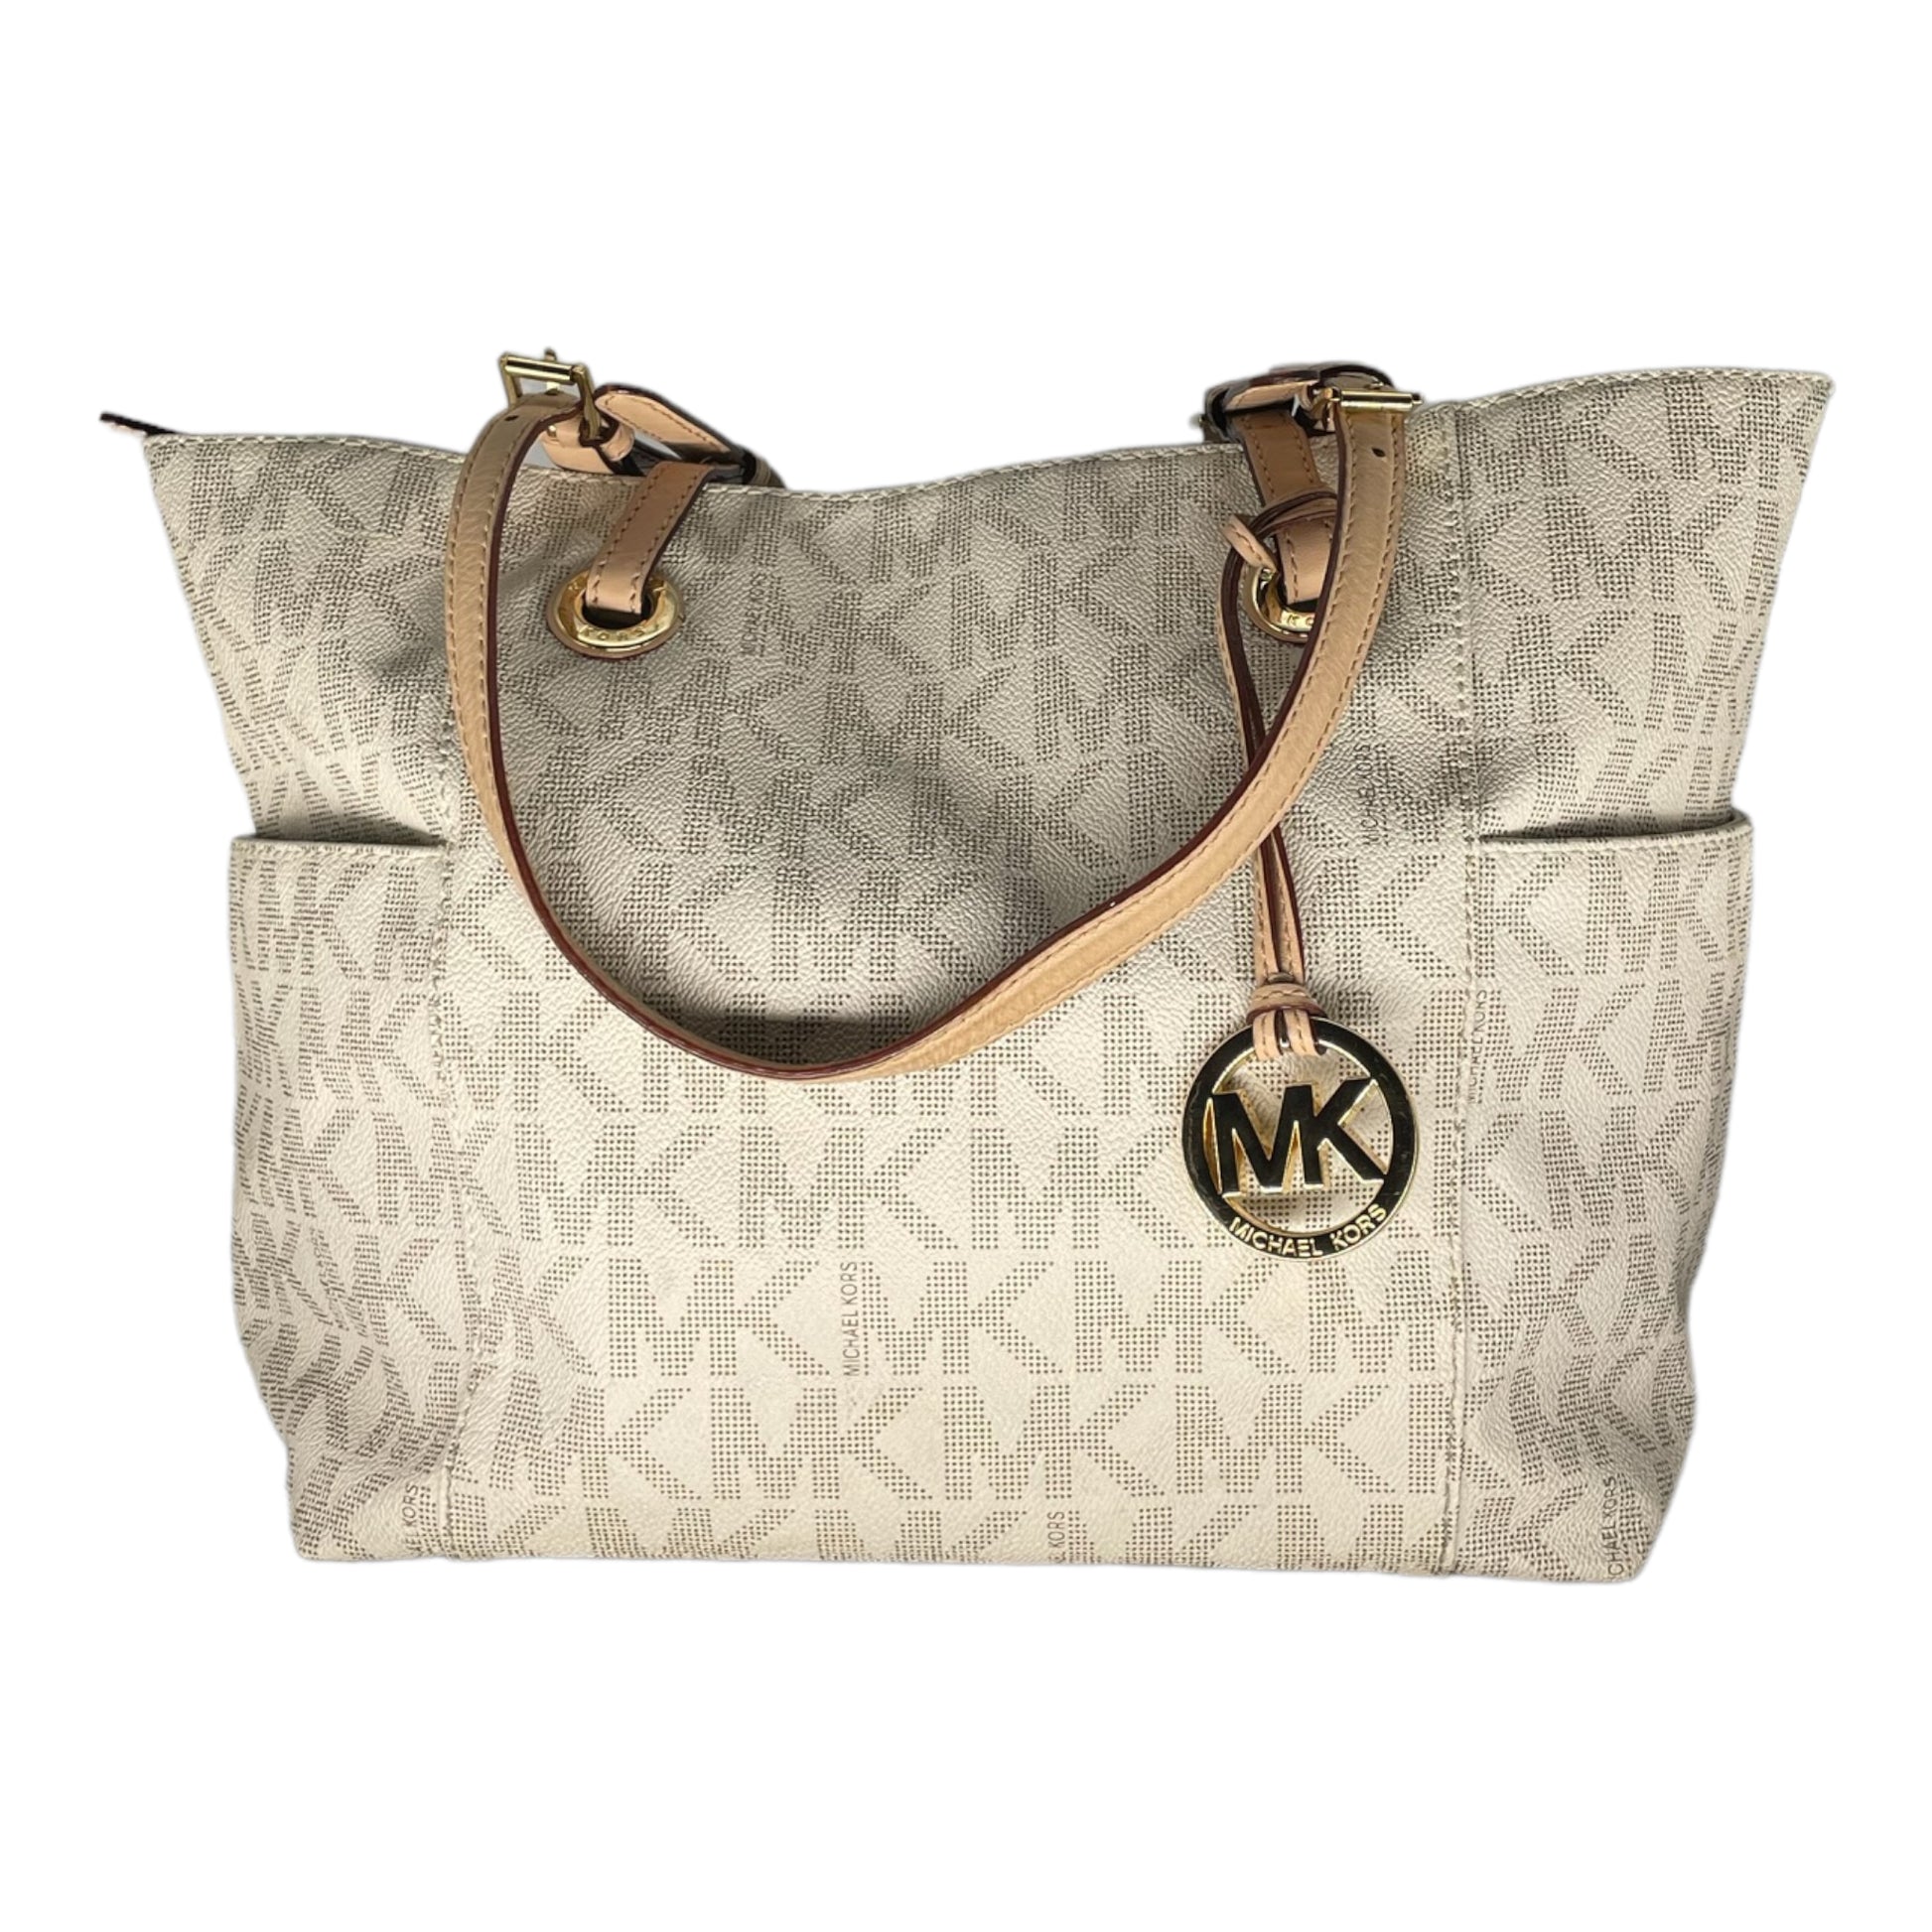 MICHAEL KORS: Michael bag in coated fabric with all over MK